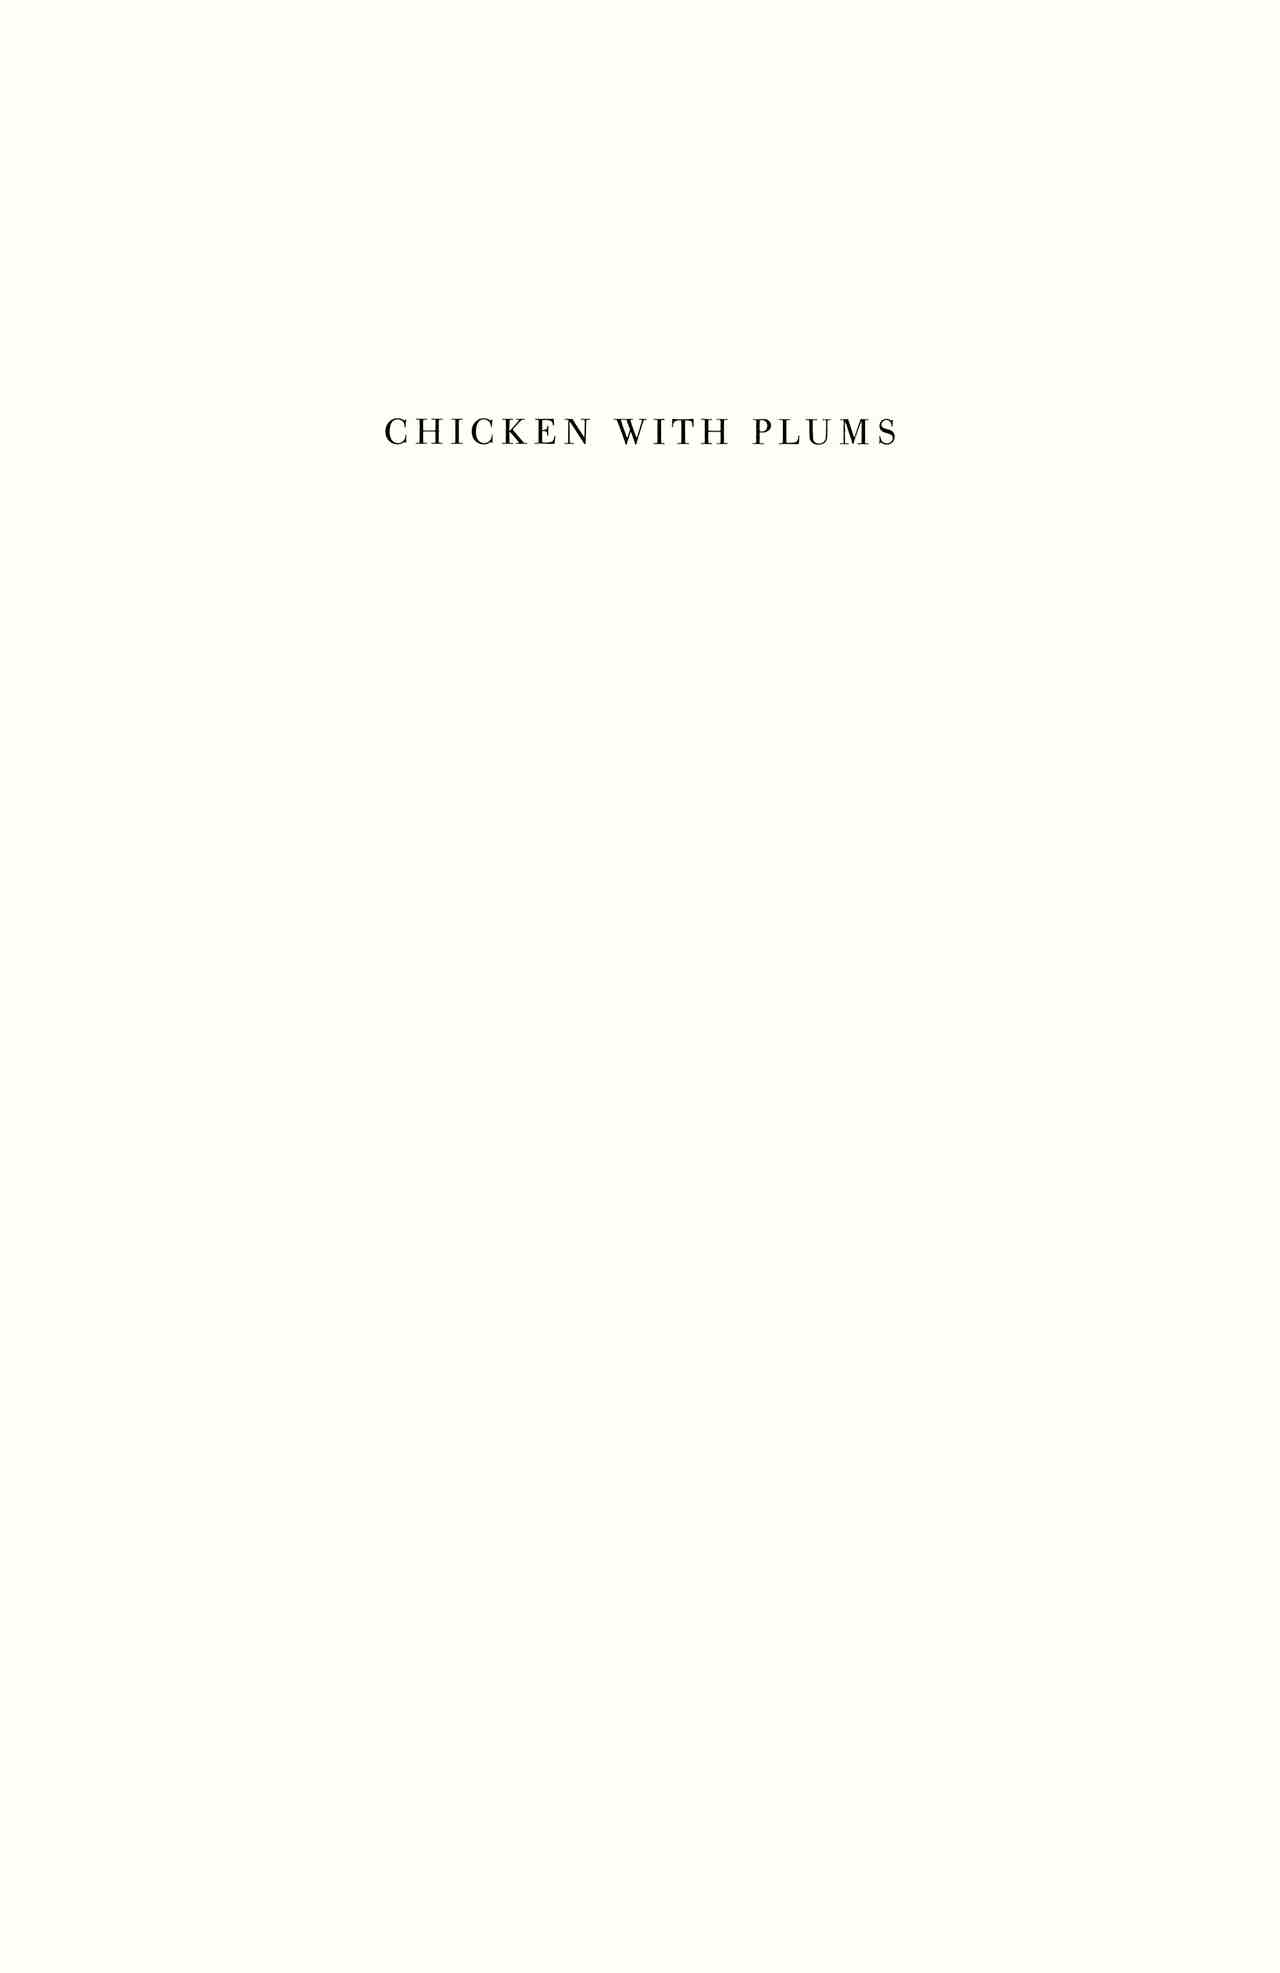 Read online Chicken With Plums comic -  Issue # TPB - 5